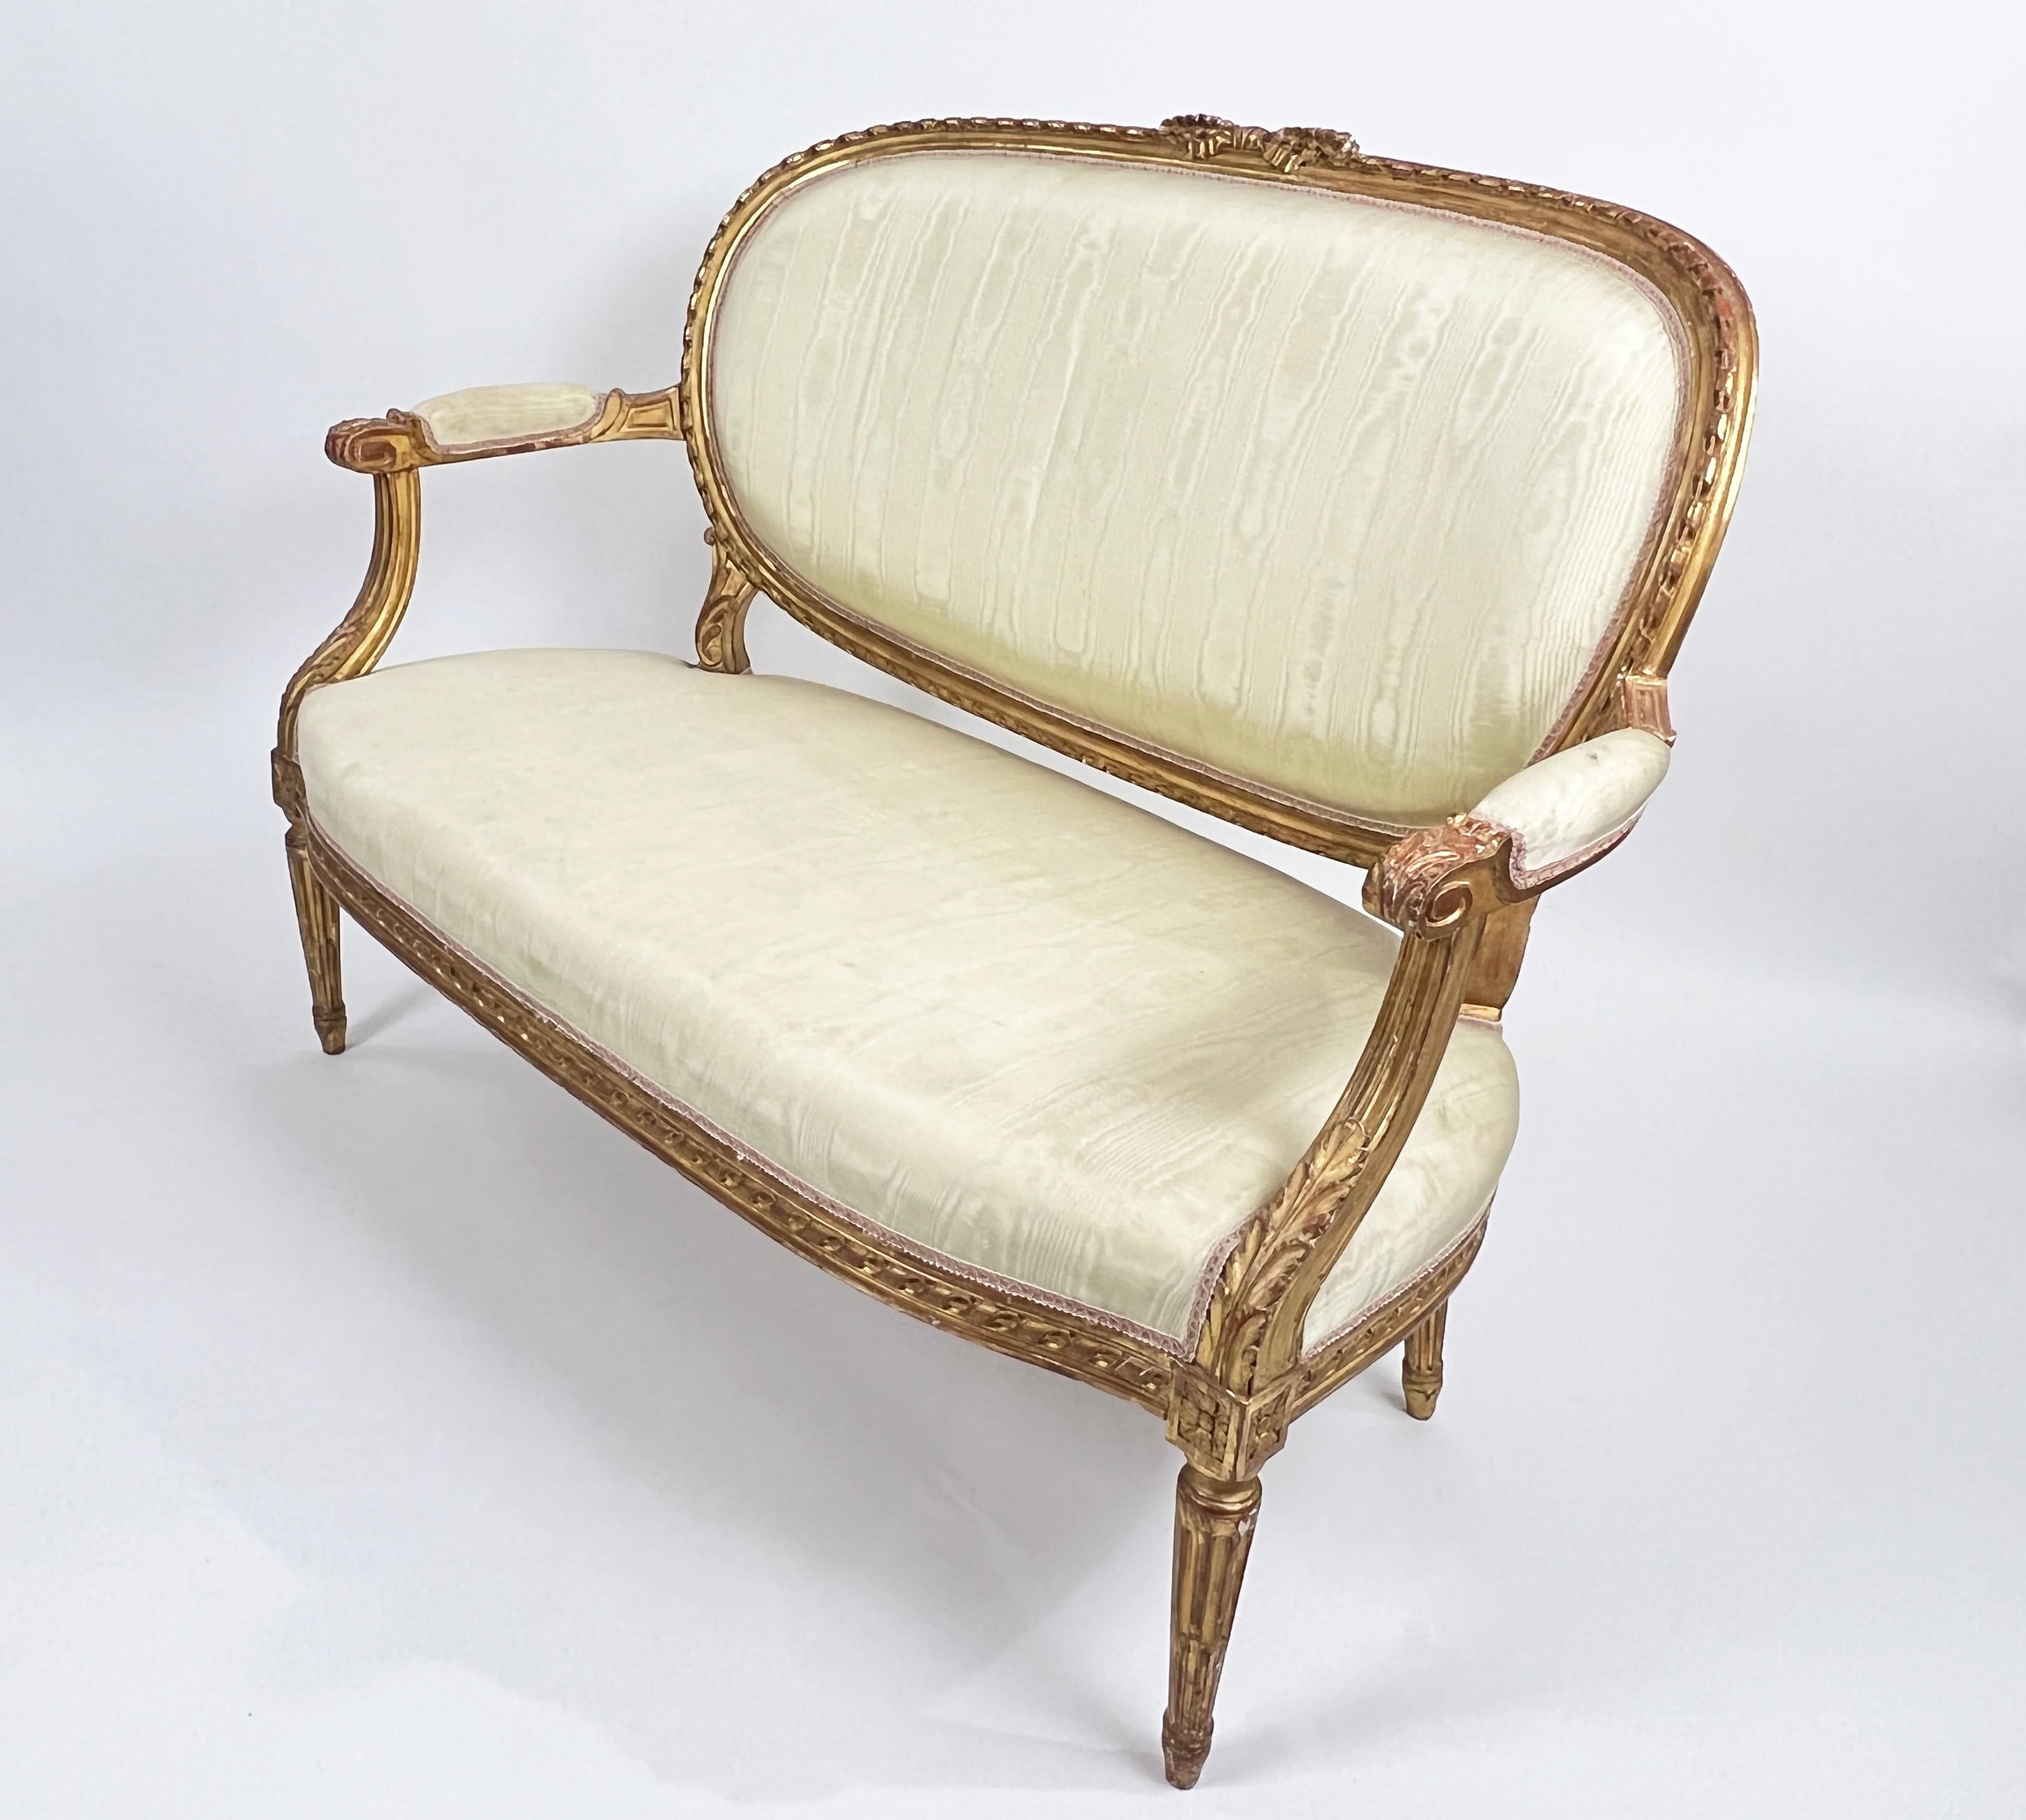 19th Century French Louis XVI Style Gilt-Wood Five-Piece Salon Suite In Good Condition For Sale In London, GB